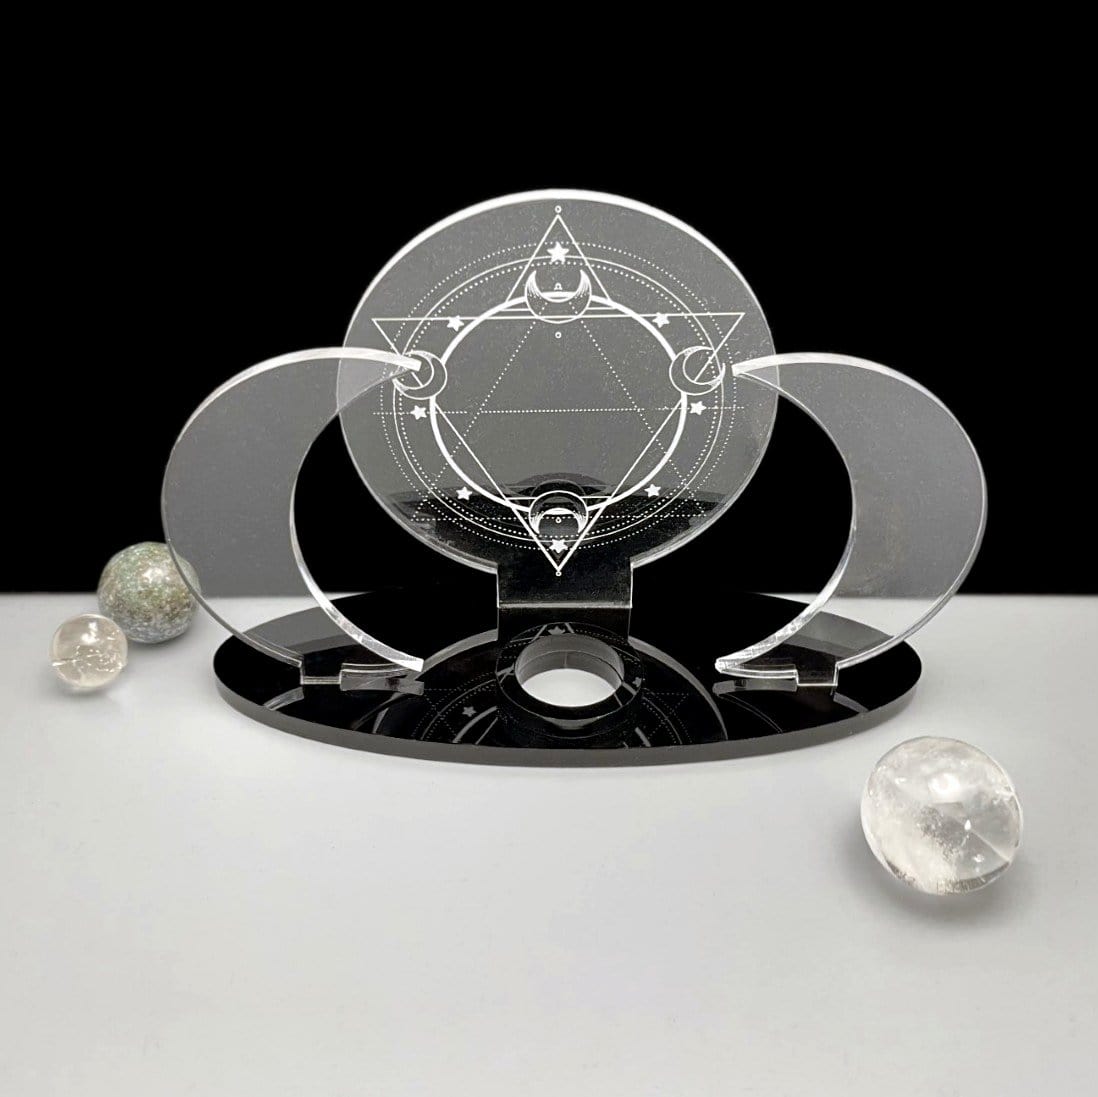 A front facing Acrylic Sphere Holder Sacred Geometry - 6 Pointed Star holding no sphere.